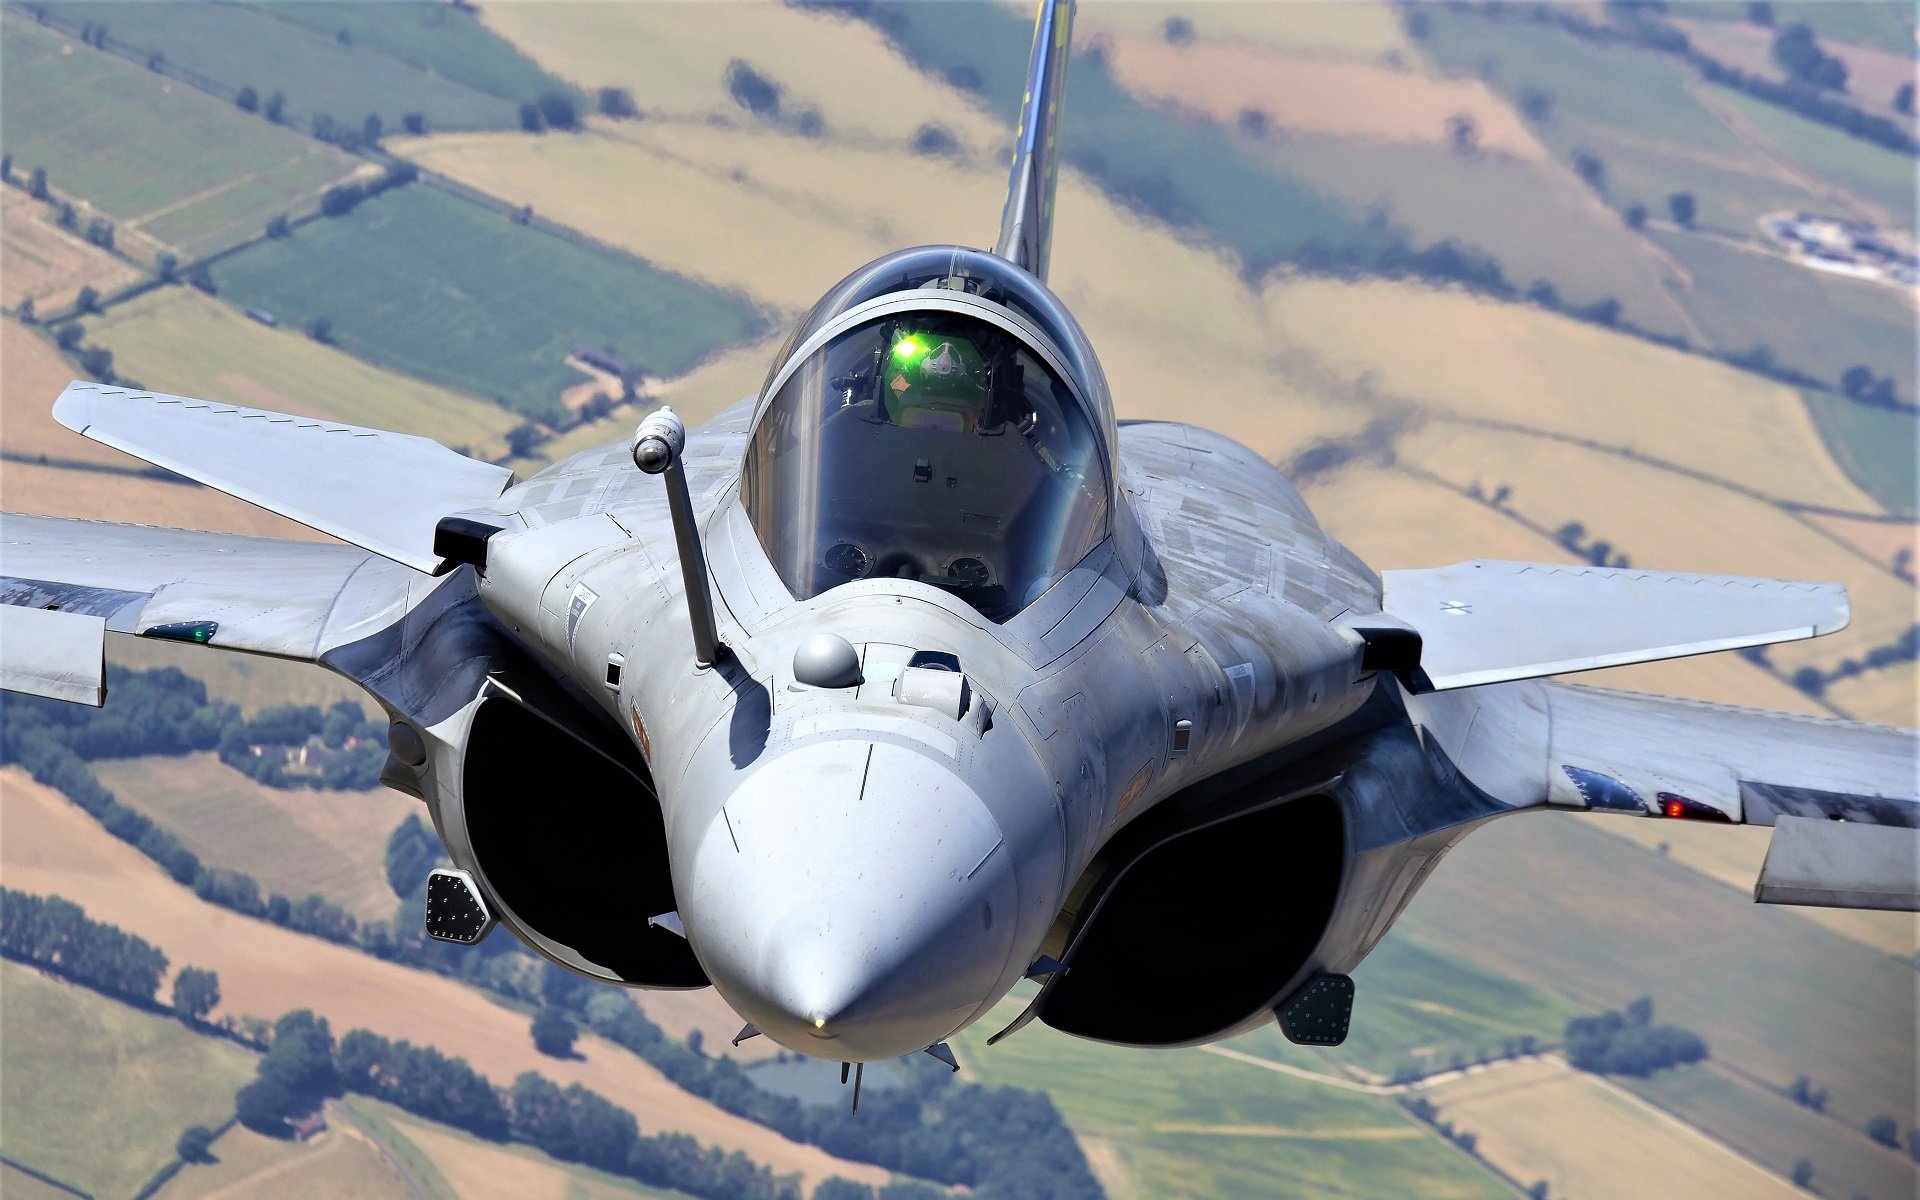 Dassault Rafale French Air Force Hd Wallpaper Background Image | Free ...